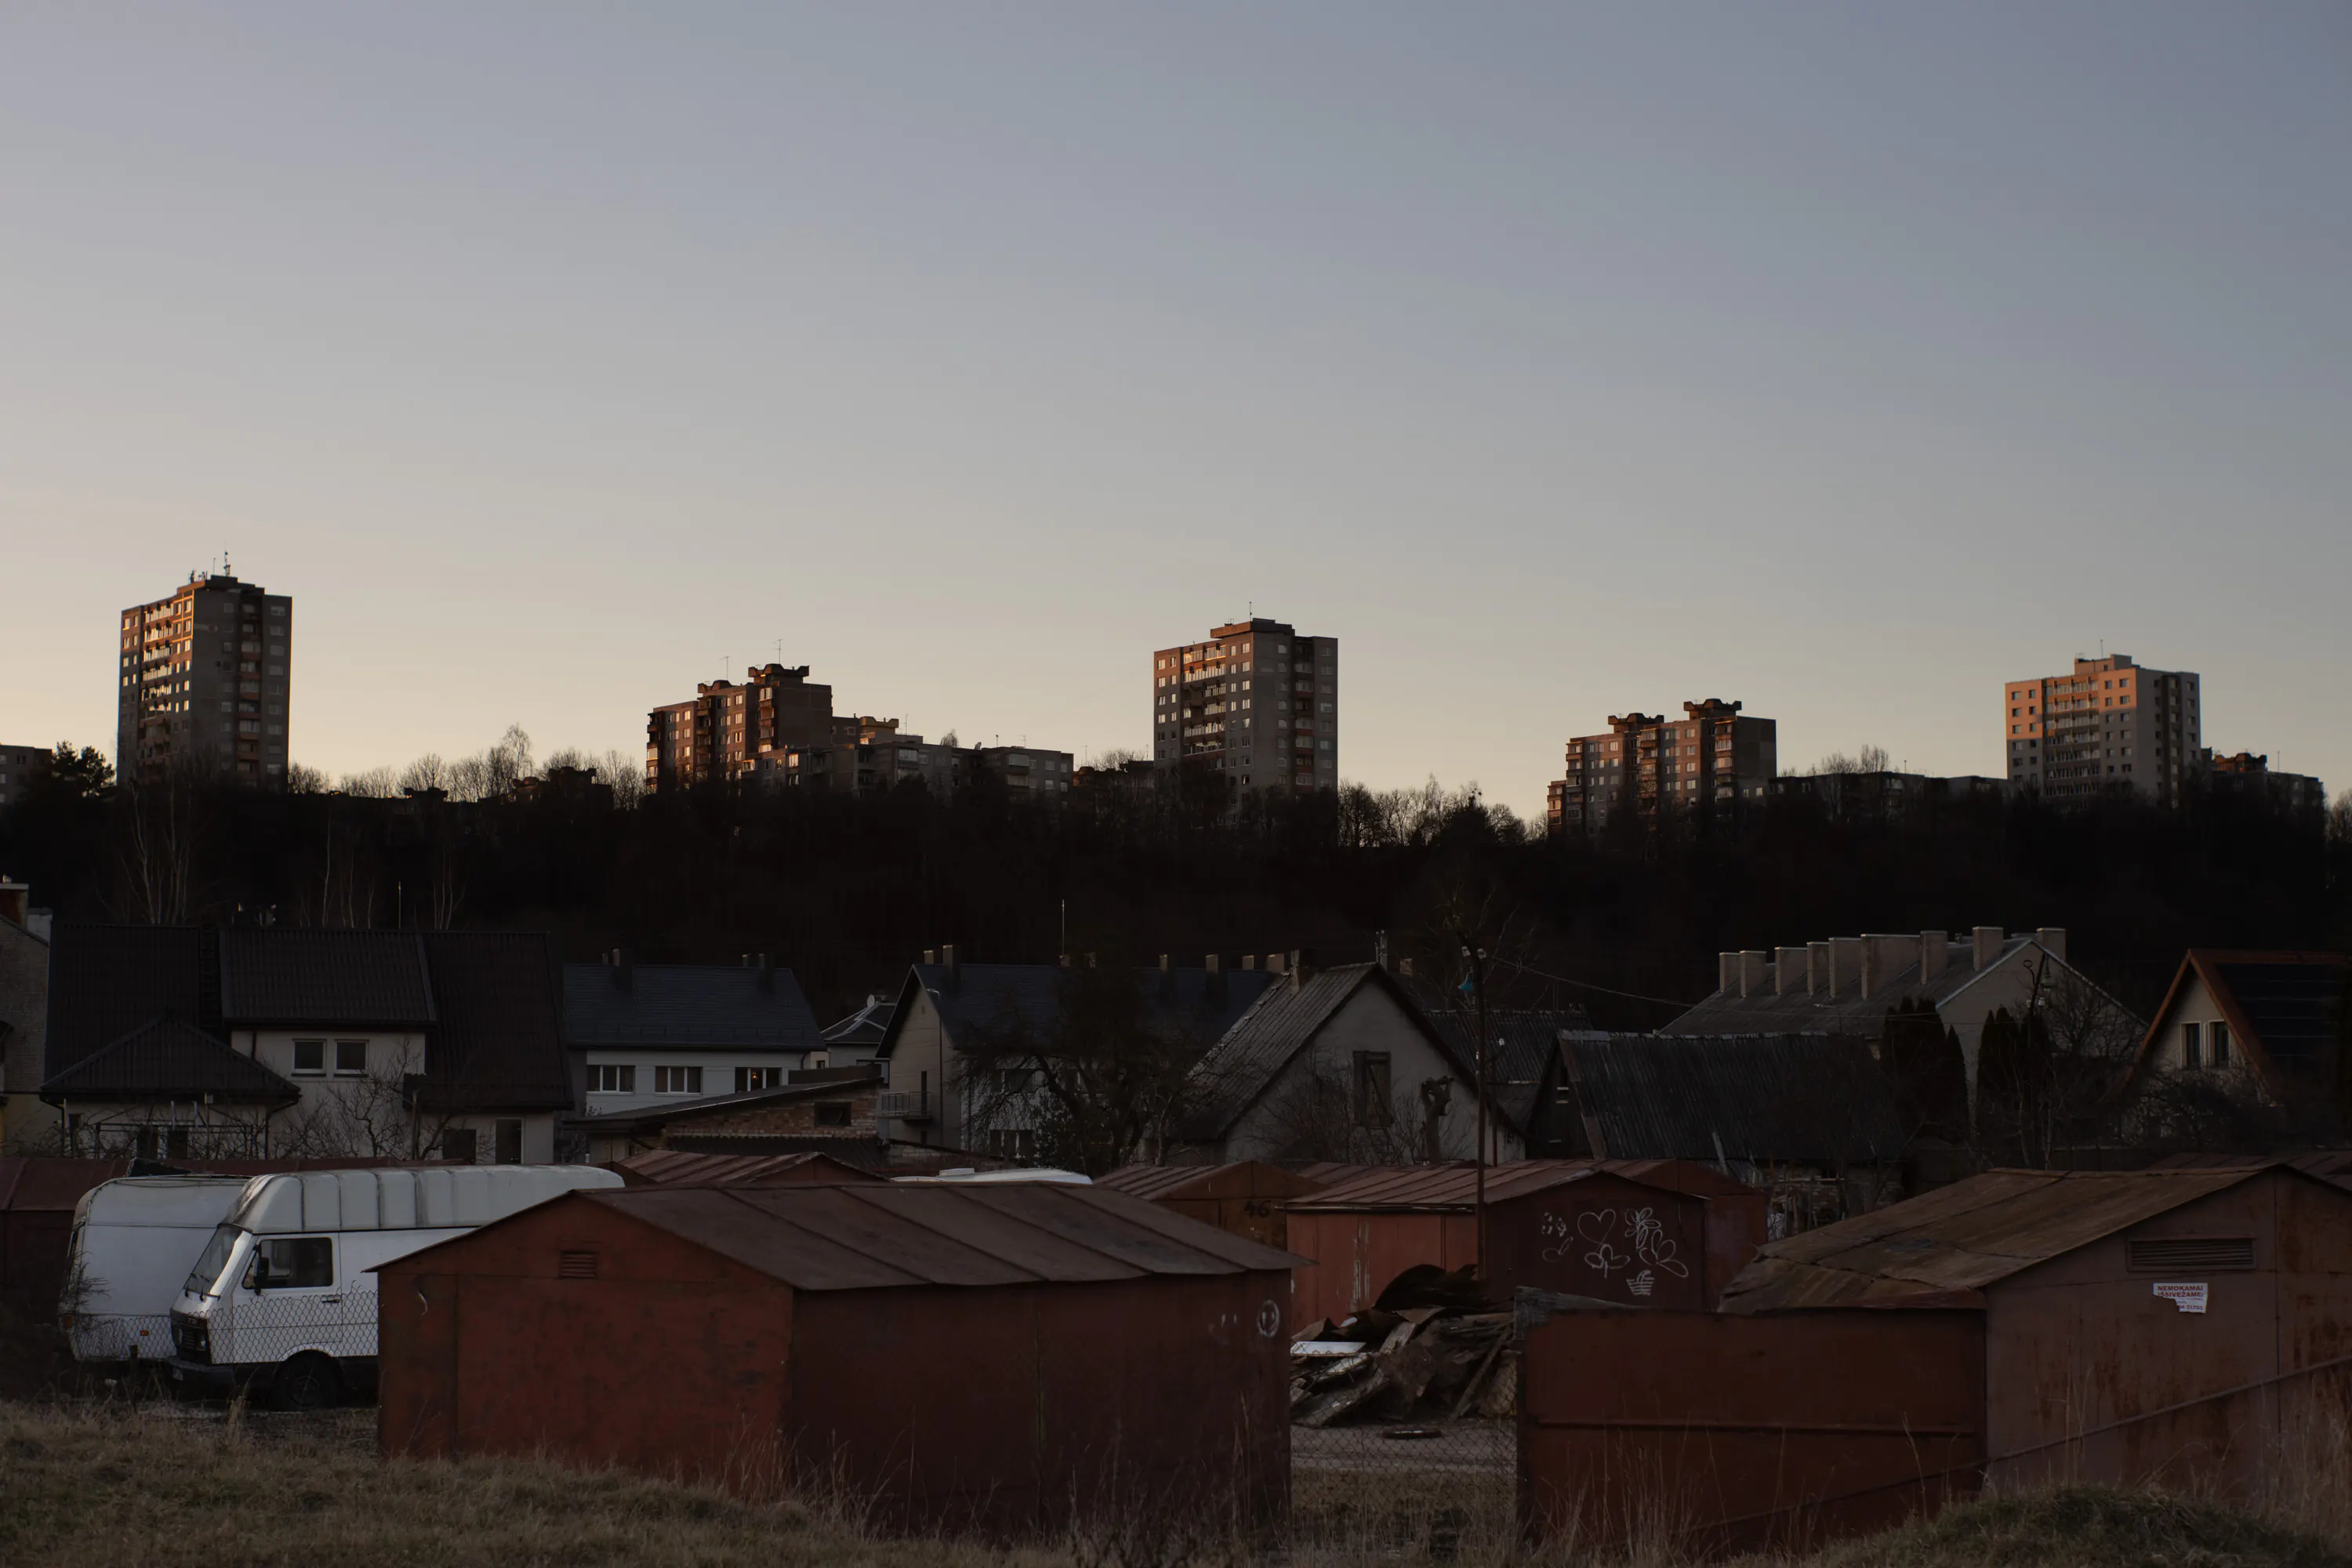 Panorama of Kaunas suburbs. Lithuania. Canon FL 58mm f1.2 shows great sharpness at infinity when stopped down.